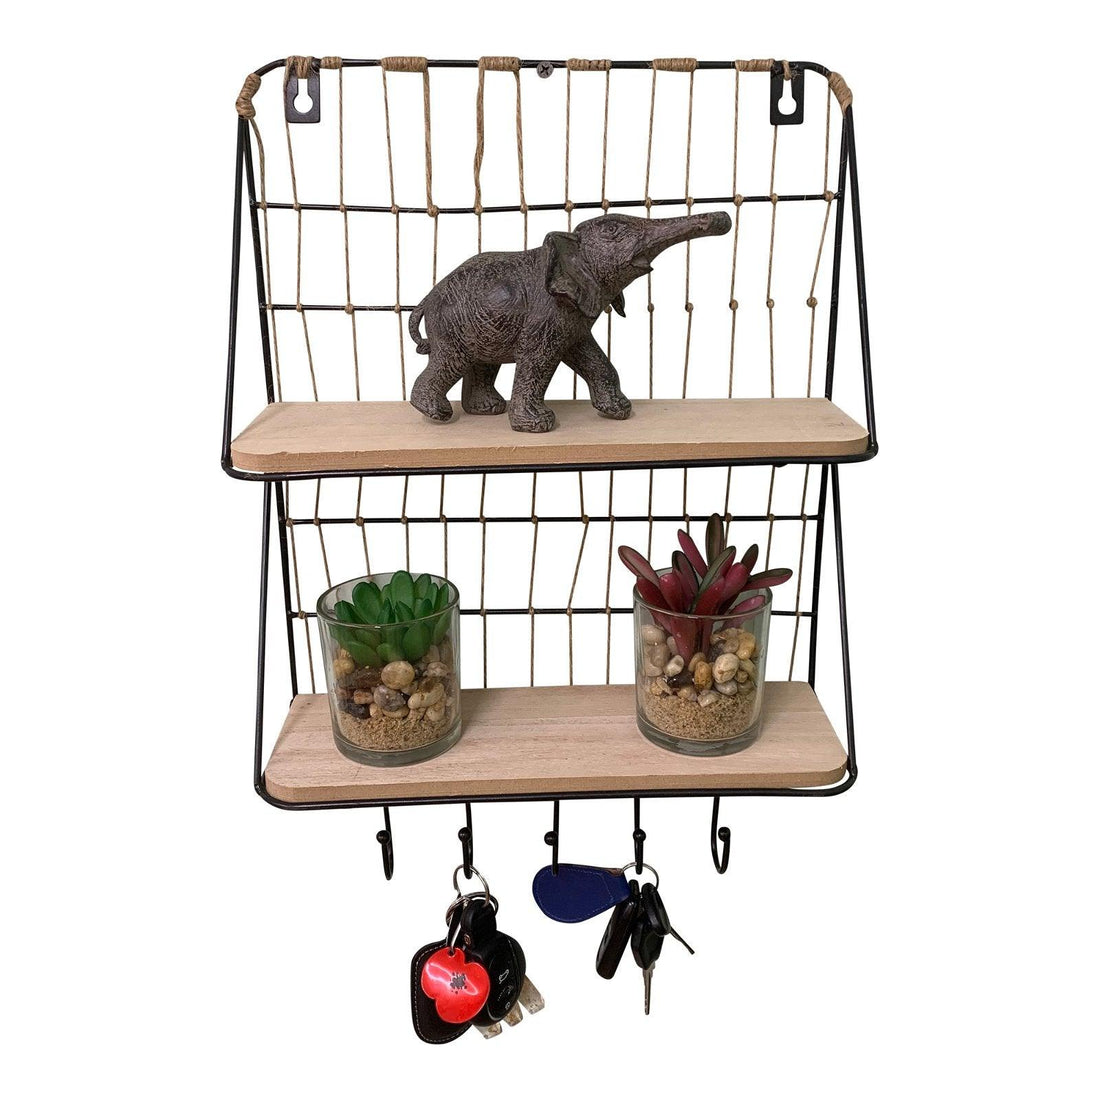 Synergy Wooden Shelf with 4 Hooks - £44.99 - Wall Hanging Shelving 